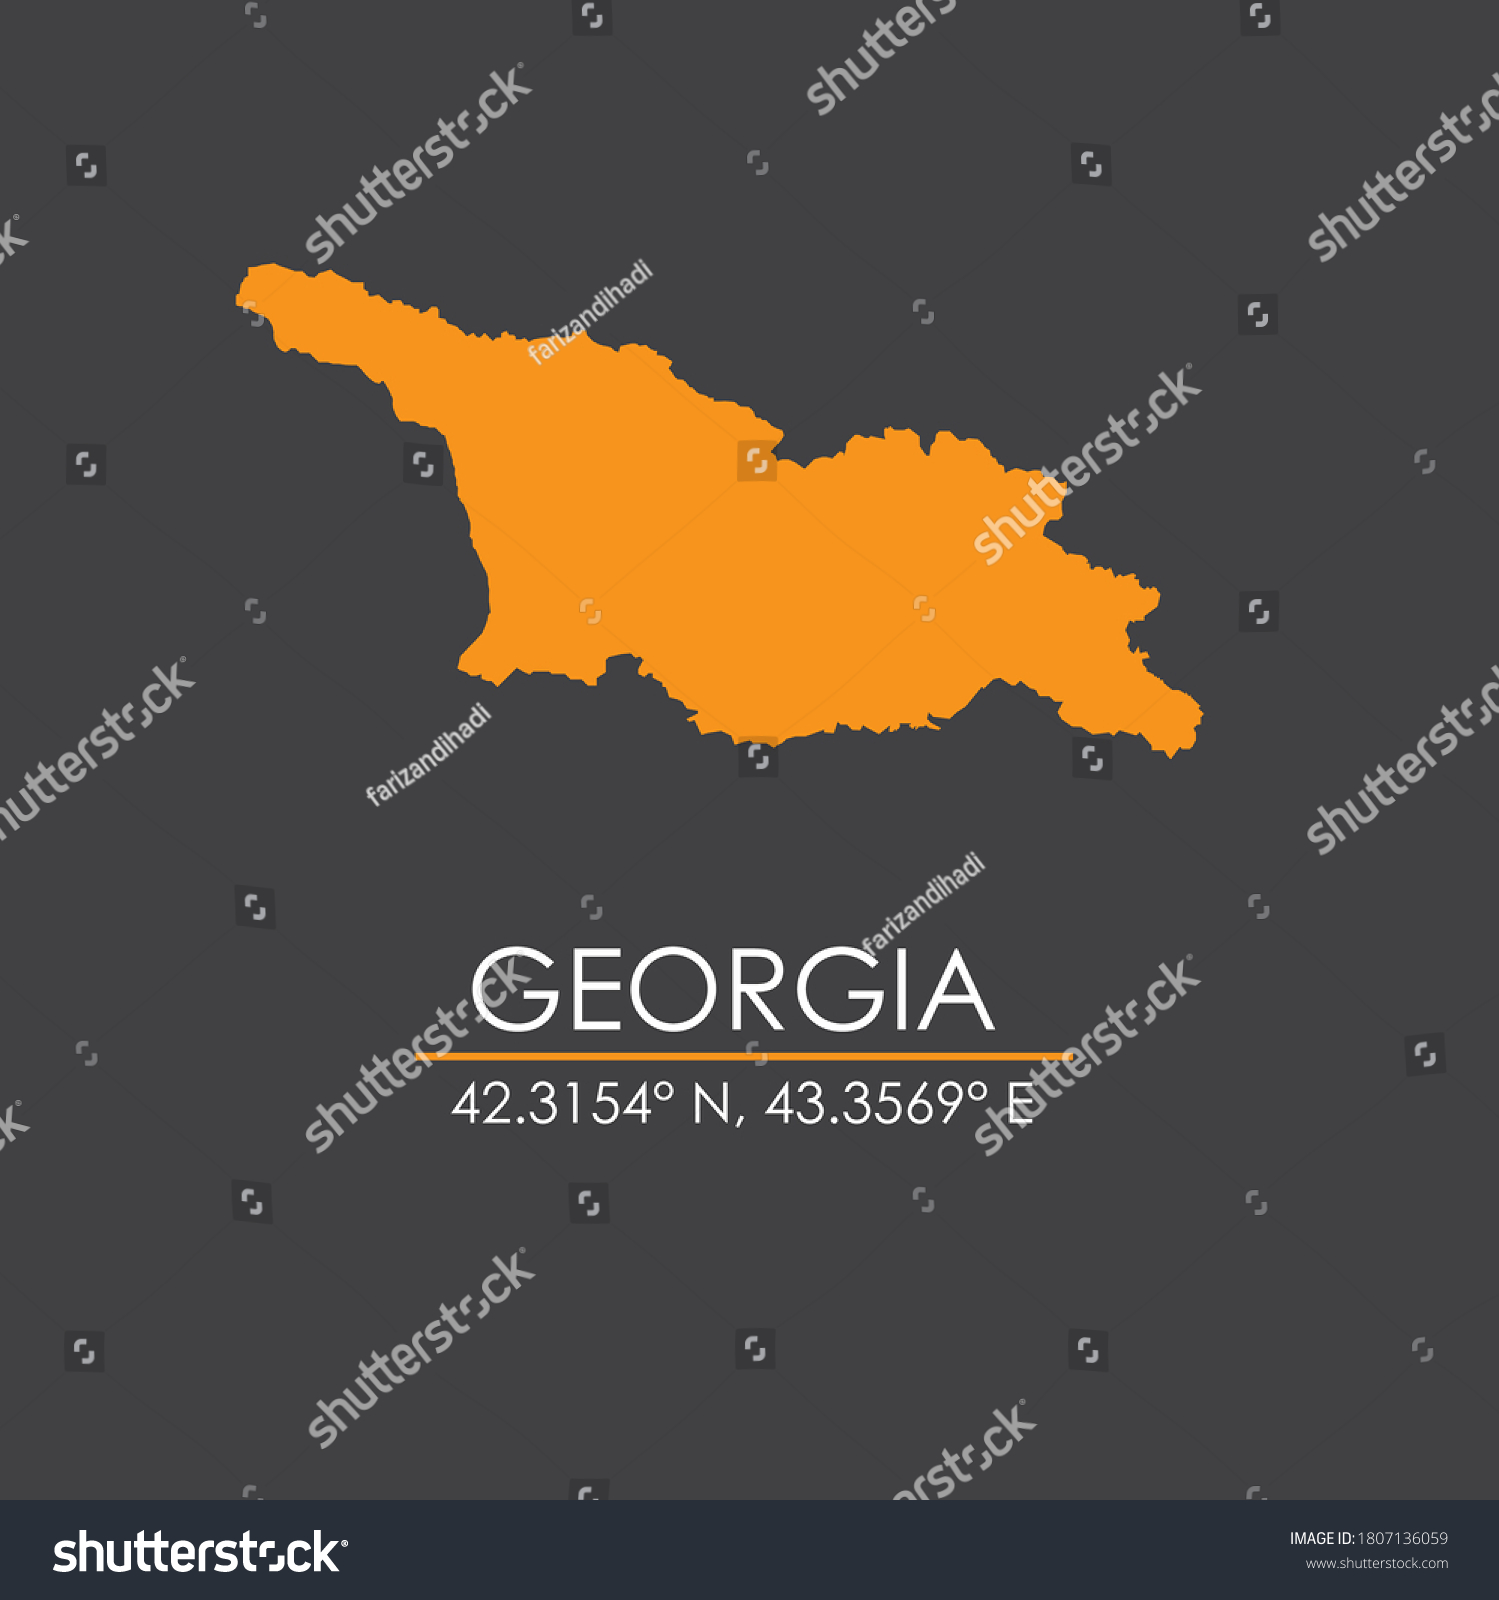 Georgia Map Vector With Coordinates Isolated In Royalty Free Stock Vector 1807136059 7089